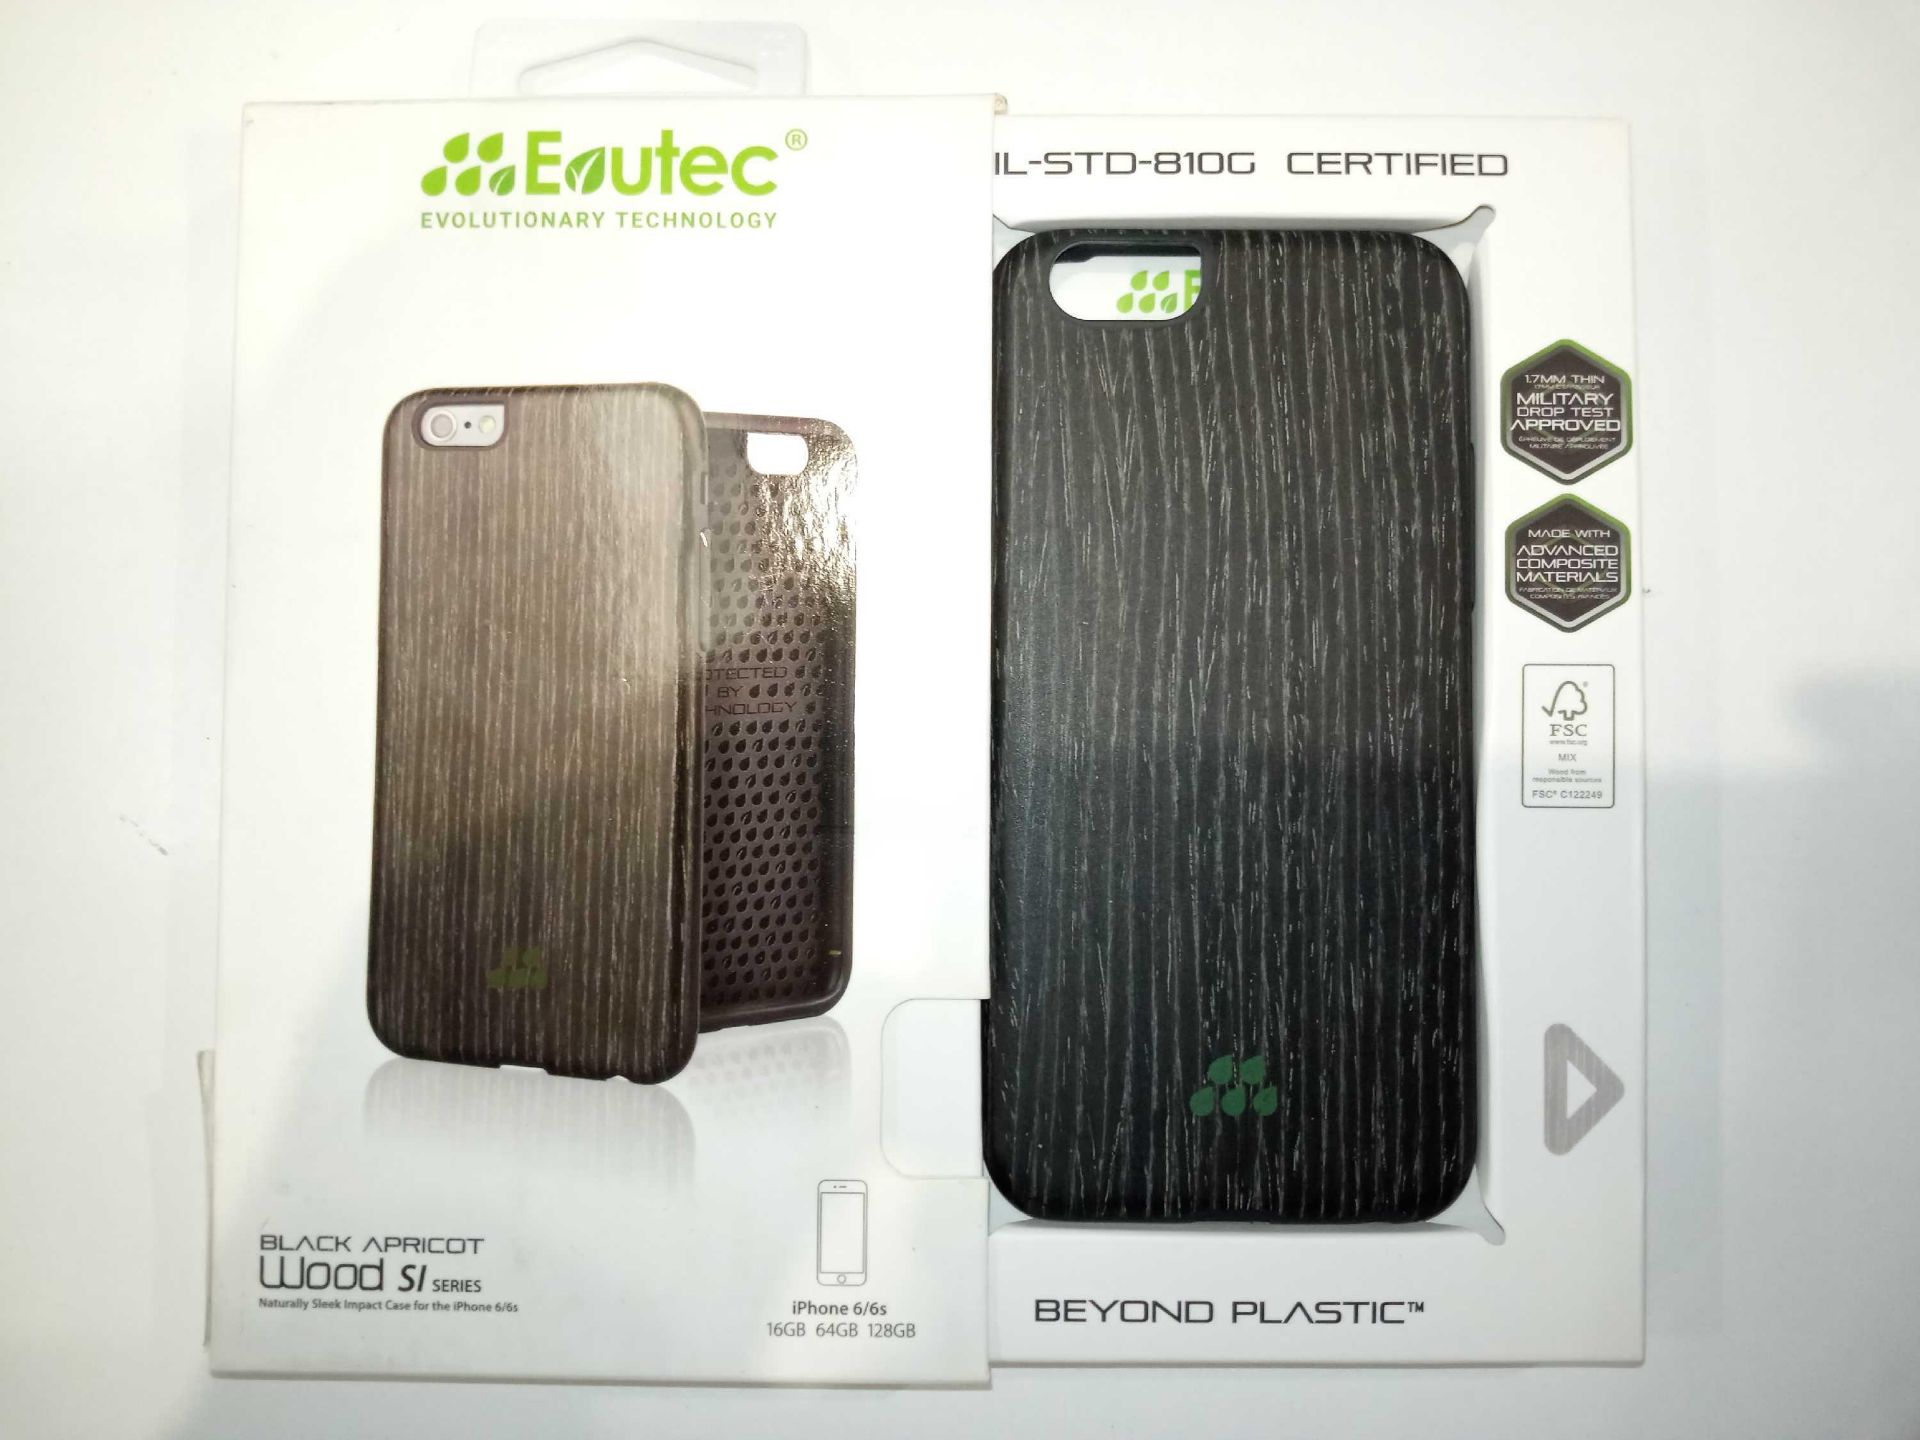 Lot To Contain 5 Evutec Iphone 6/6S Black Apricot Wood Phone Cases